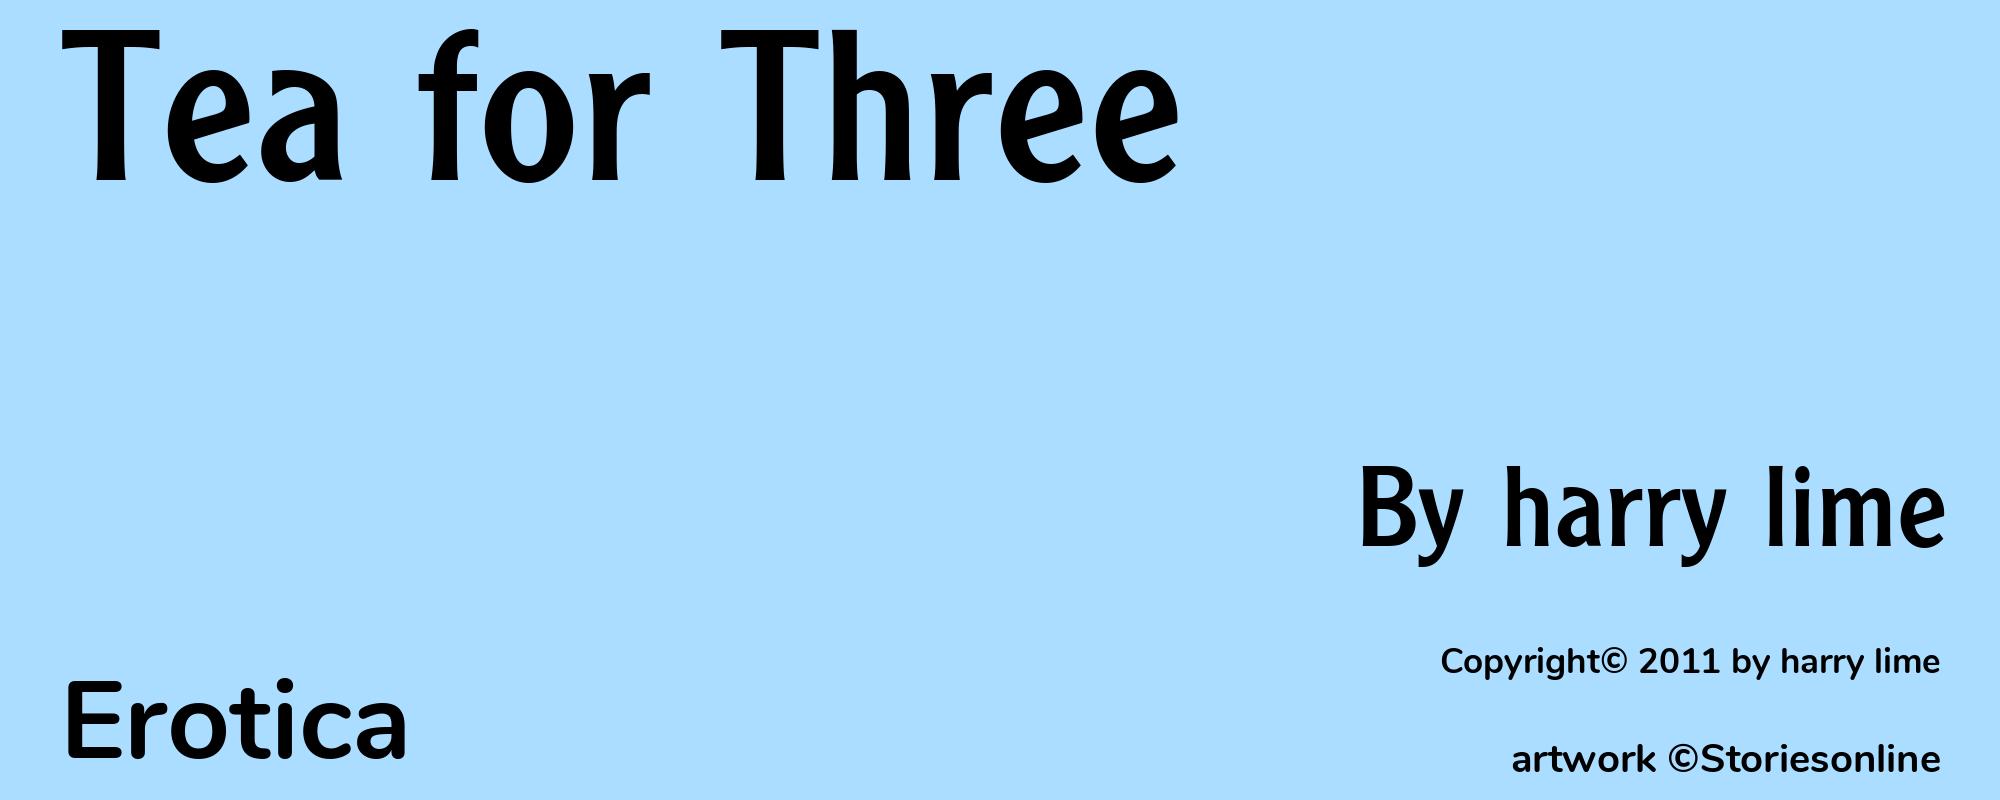 Tea for Three - Cover